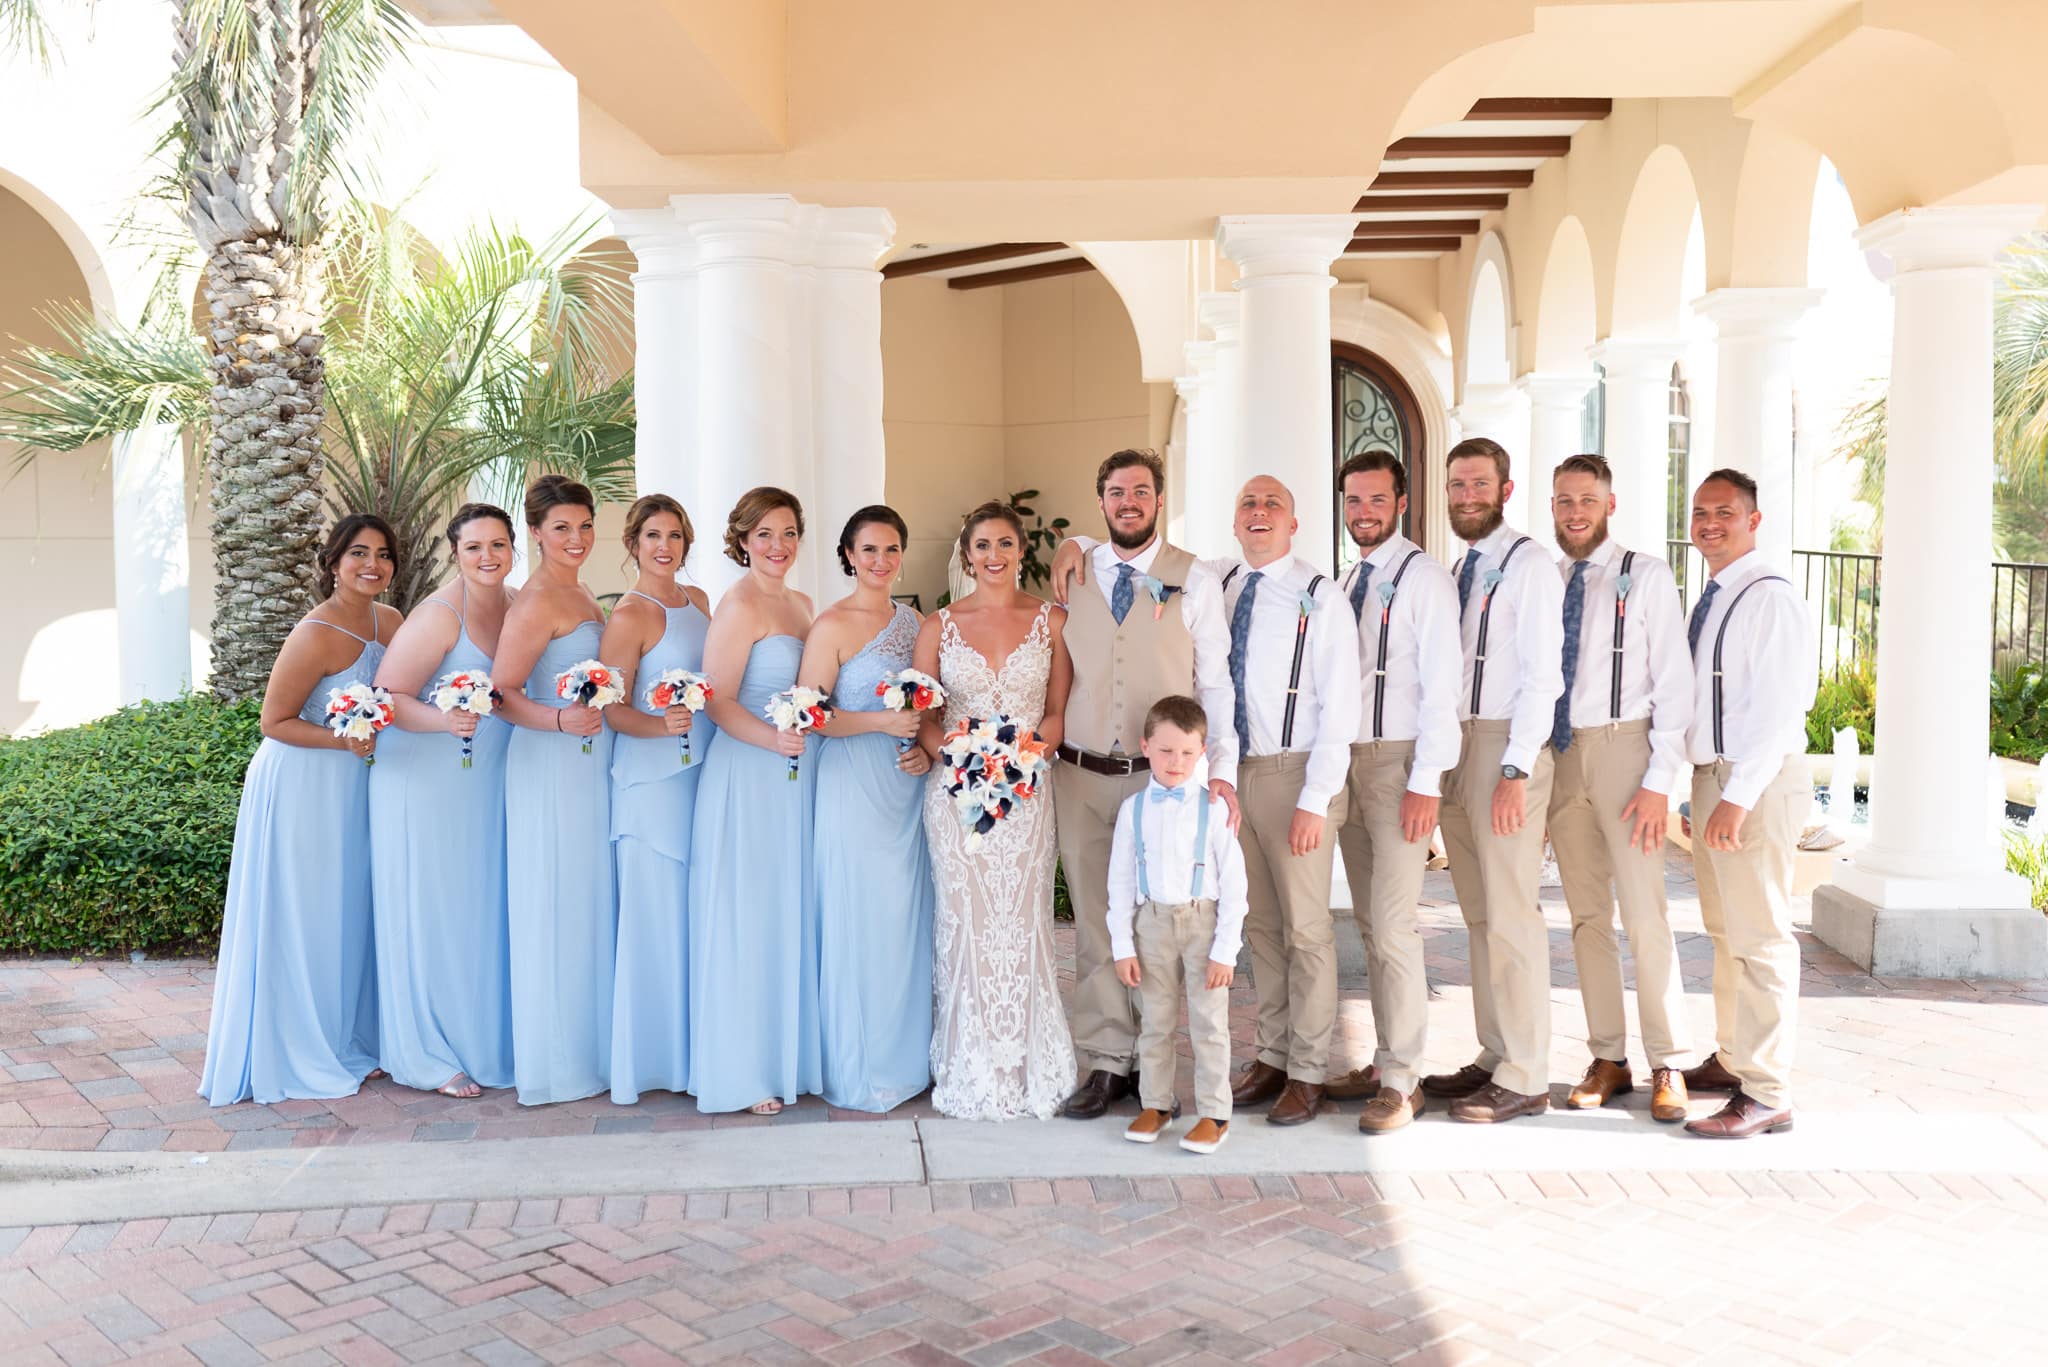 Bridal party pictures by the front columns Grande Dunes Ocean Club - Myrtle Beach